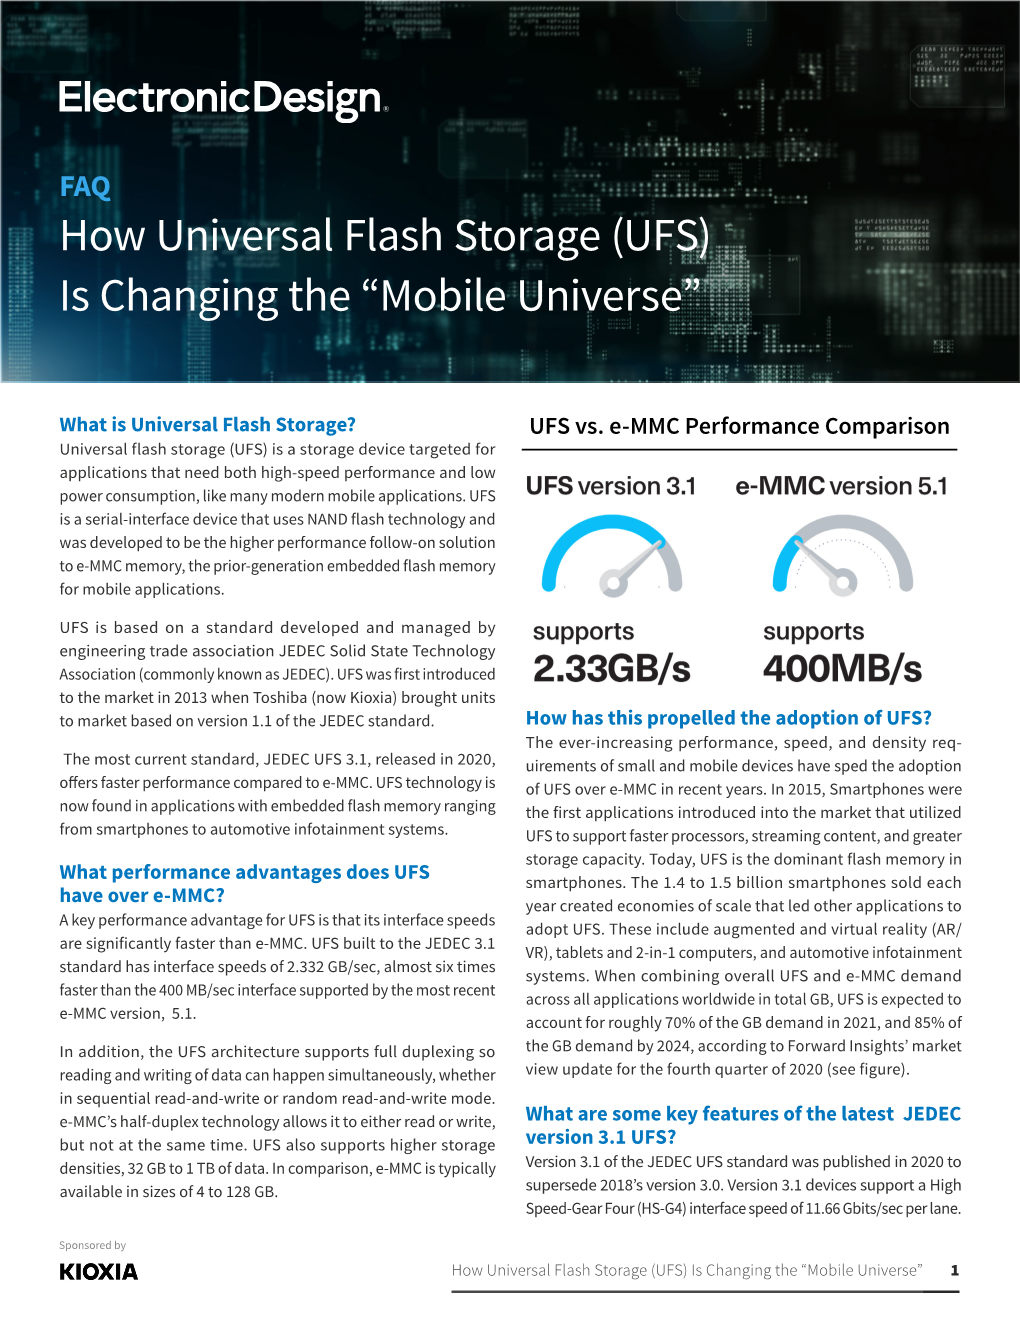 How Universal Flash Storage (UFS) Is Changing the “Mobile Universe”